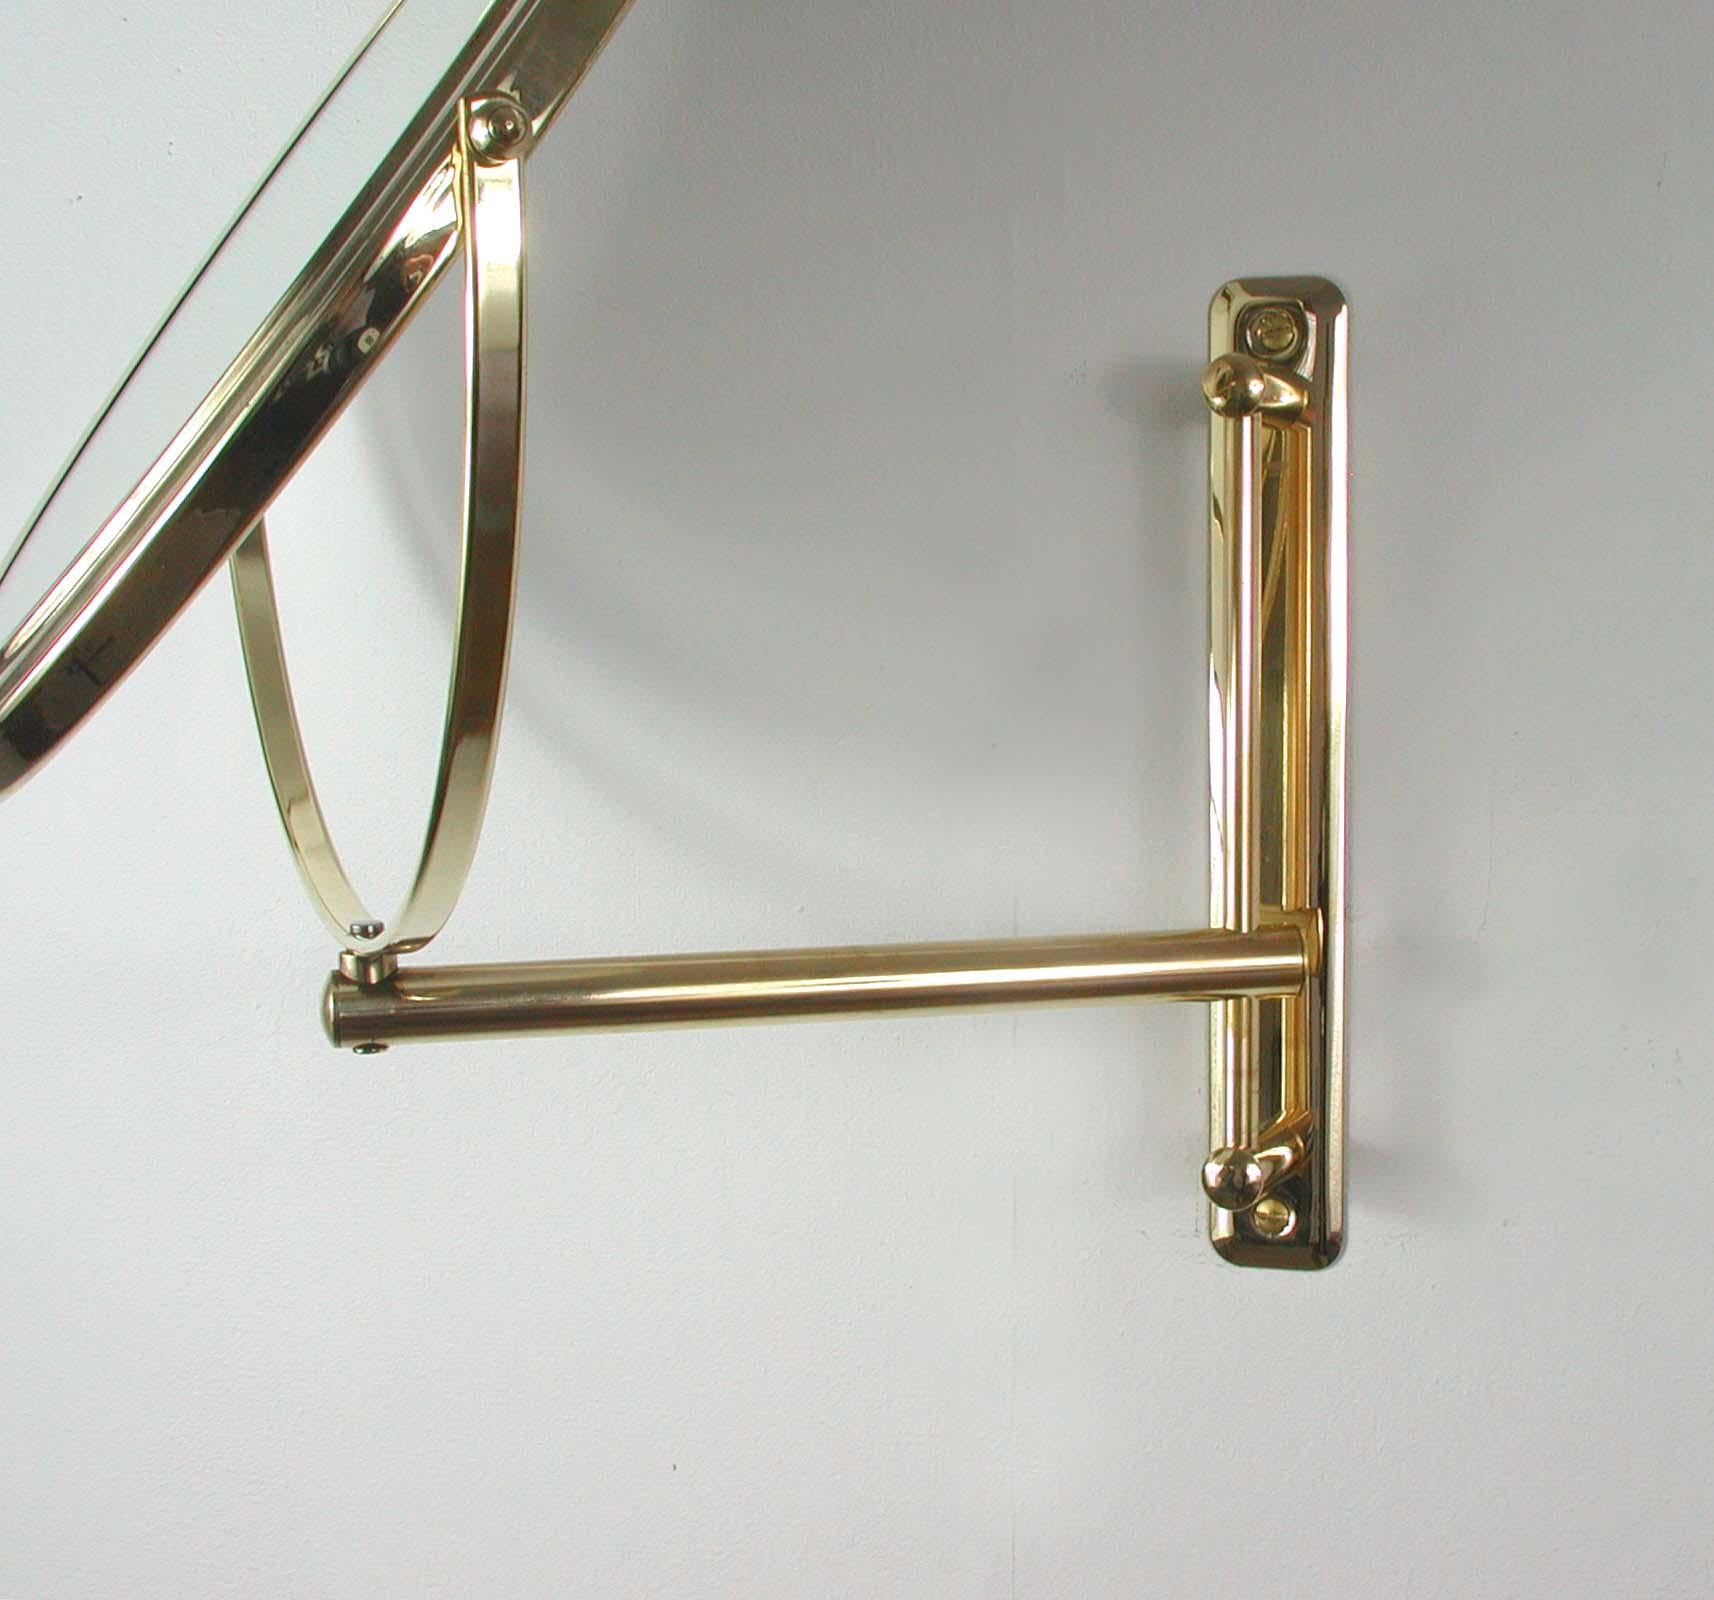 Italian Articulating and Adjustable Brass Vanity 2-Sided Wall Mirror, 1950s For Sale 1